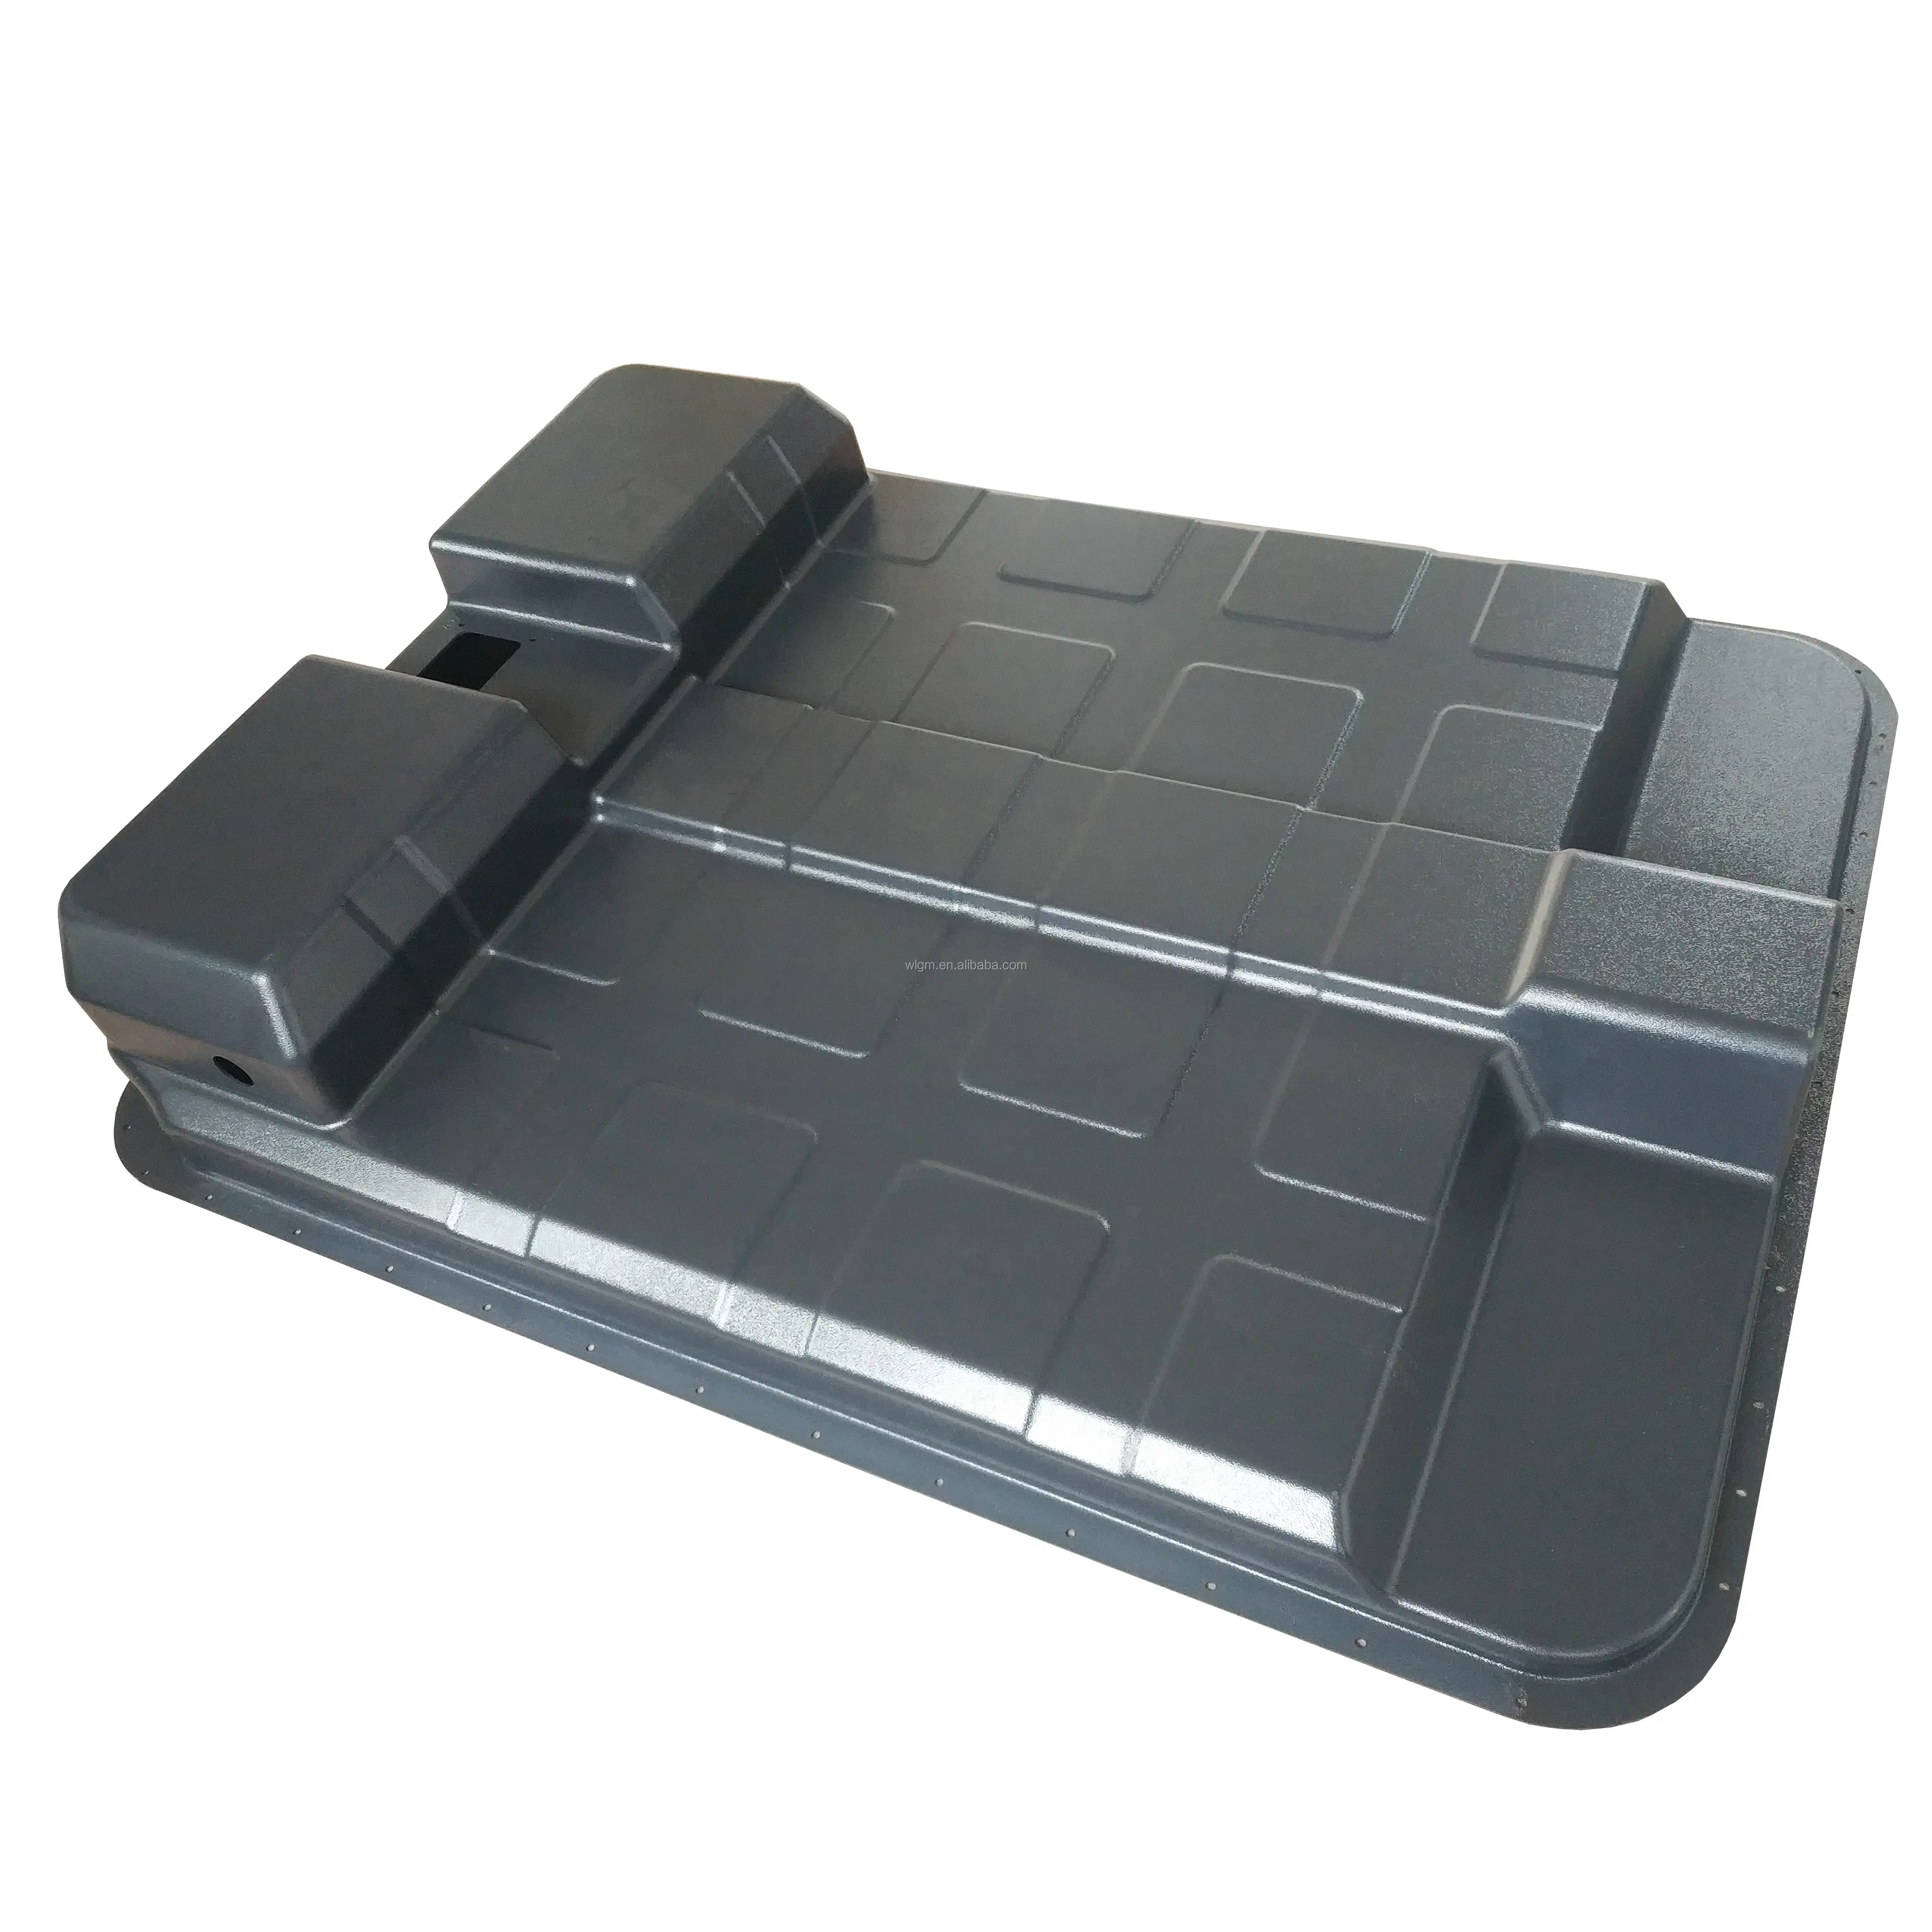 vacuumm forming products large plastic tray bus bus parts accessories plastic mould products supplier vacuum formed tray